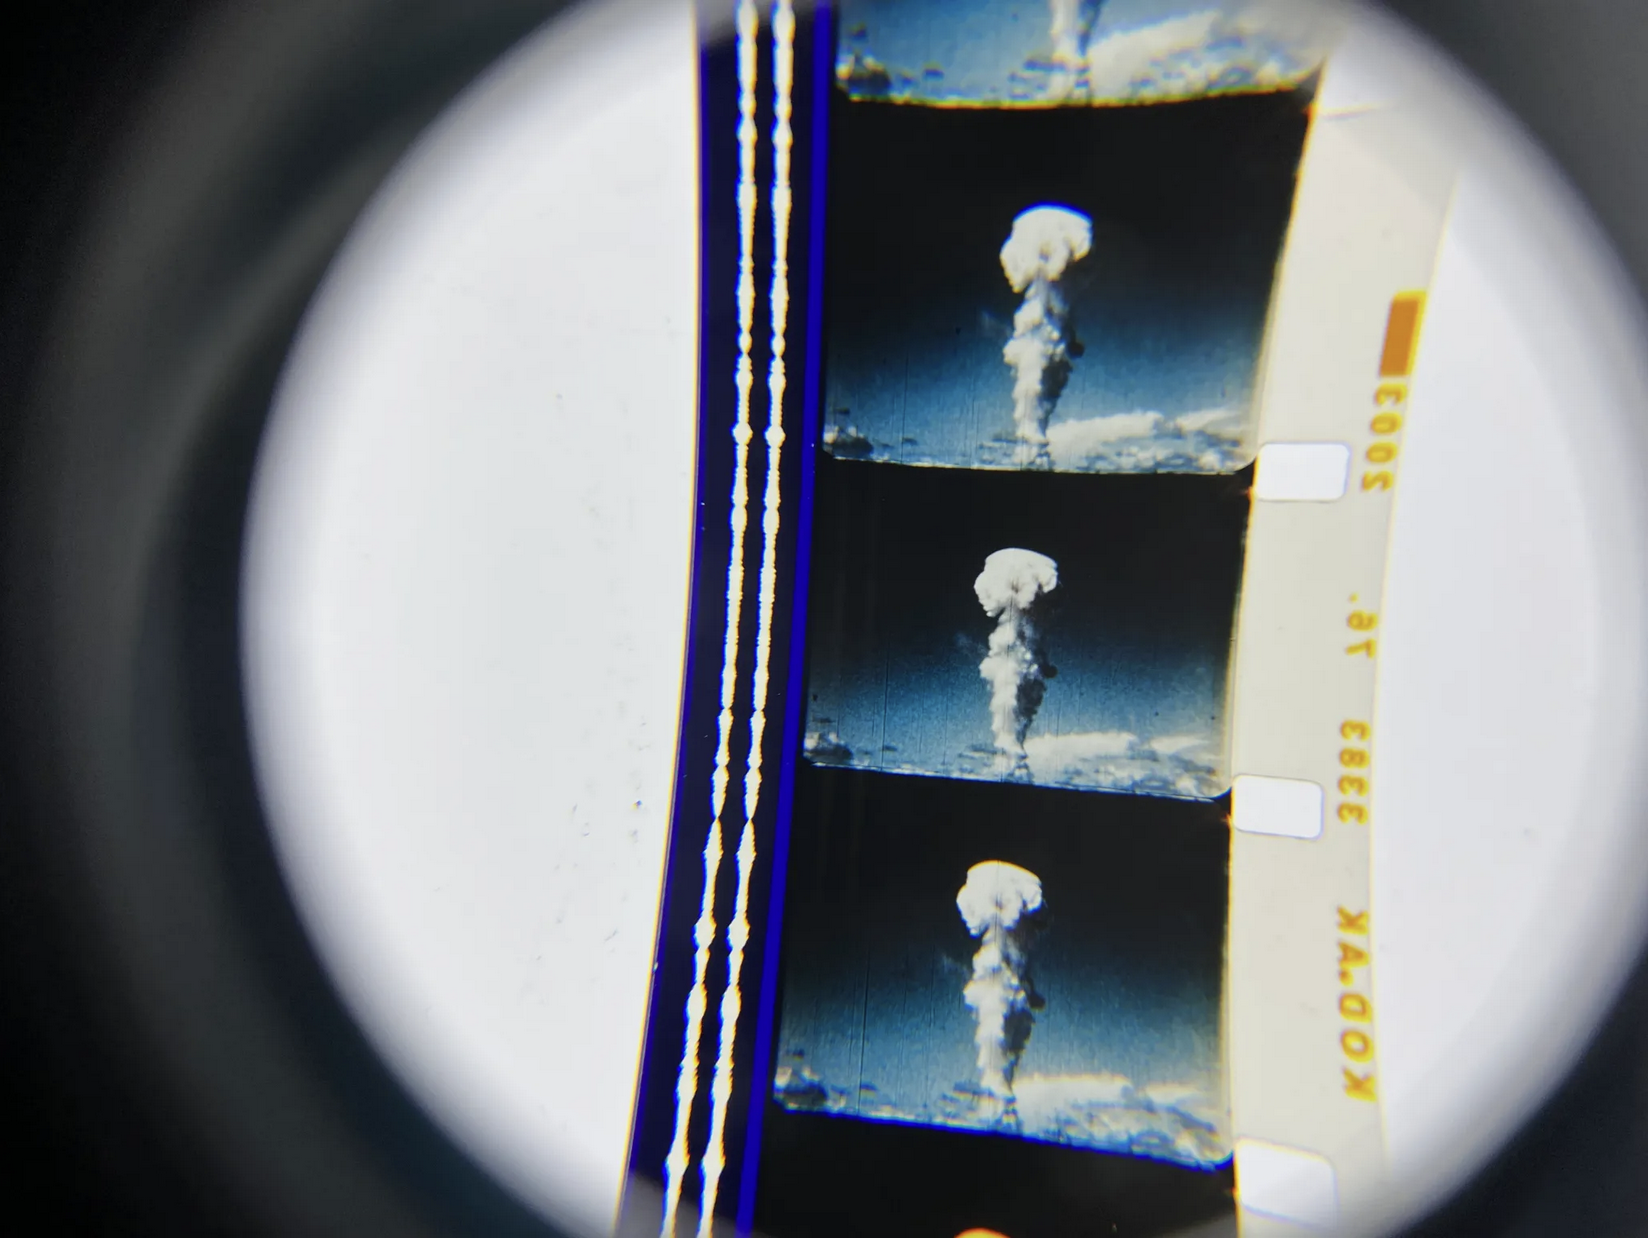 Three frames of a film strip, viewed in close up, show the mushroom cloud of a nuclear explosion